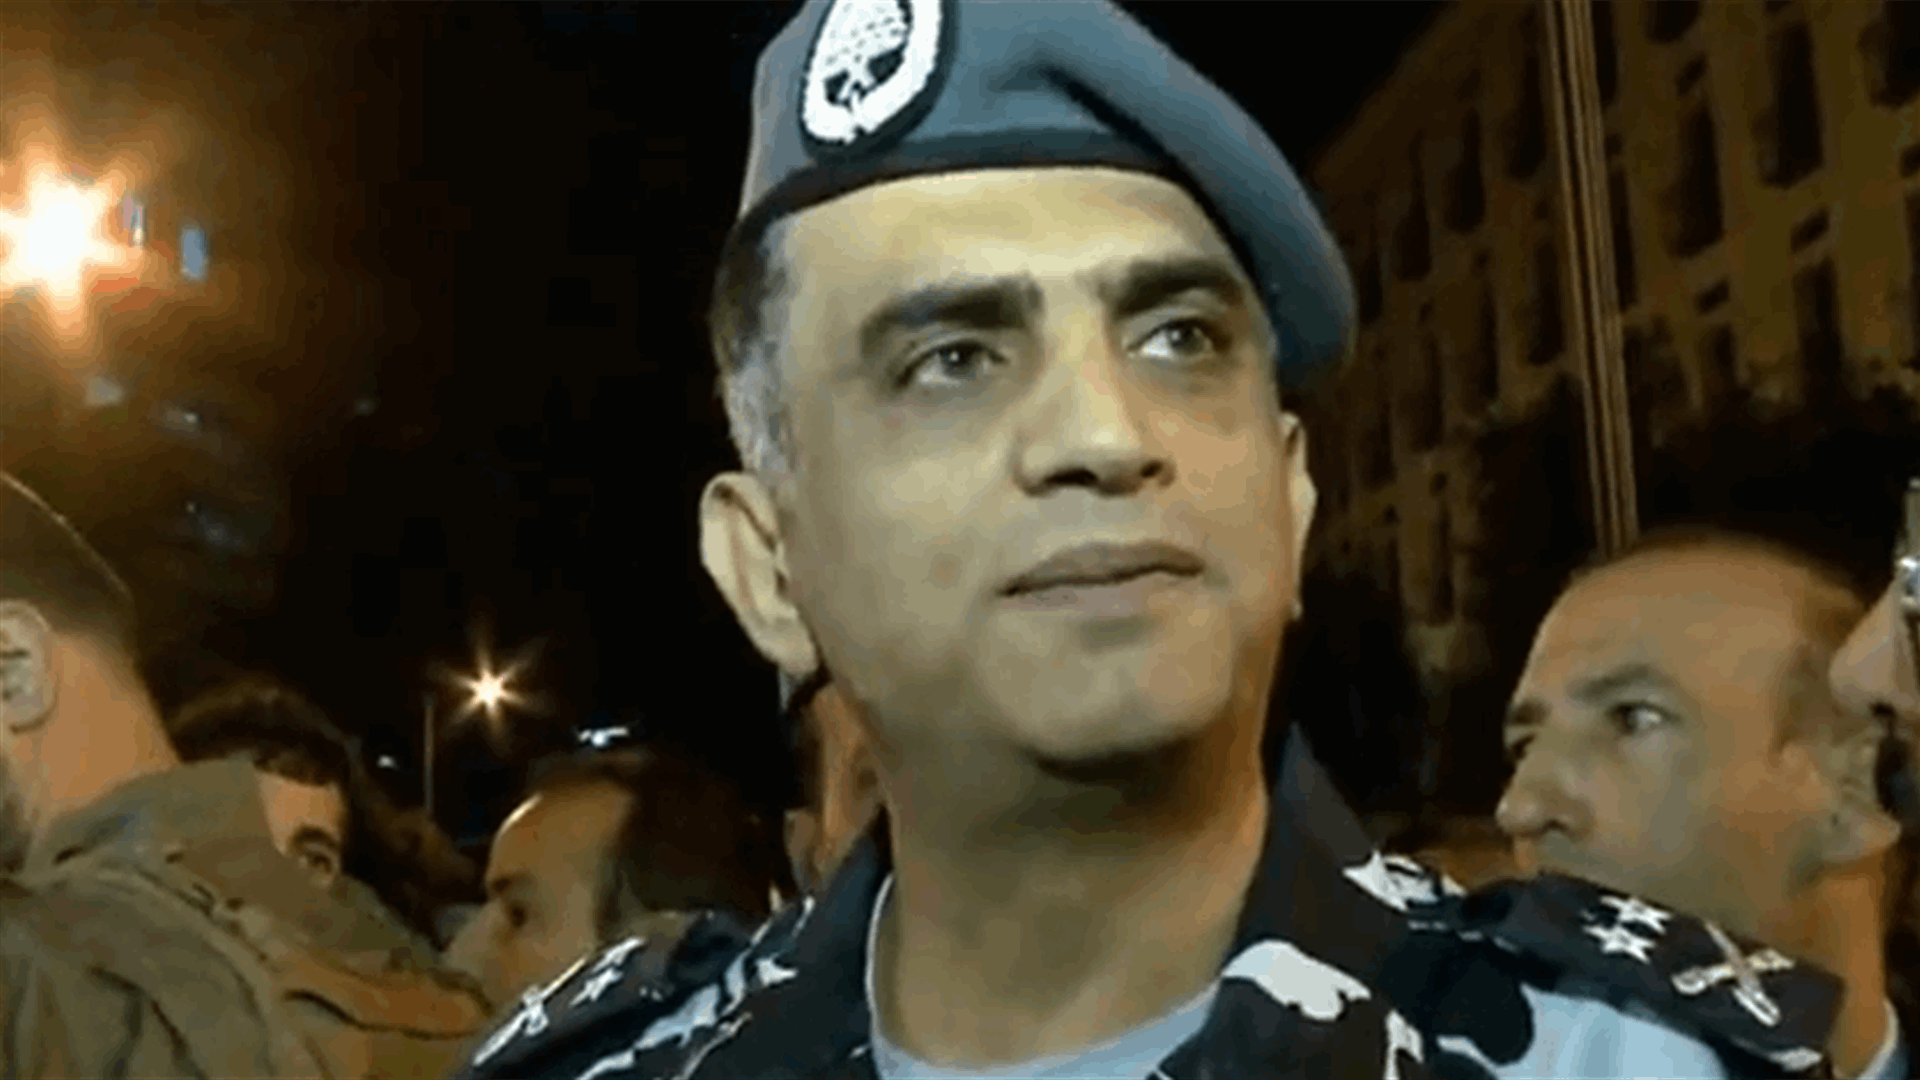 Maj. Gen. Othman from central Beirut: Attacks against security forces unacceptable (Video)